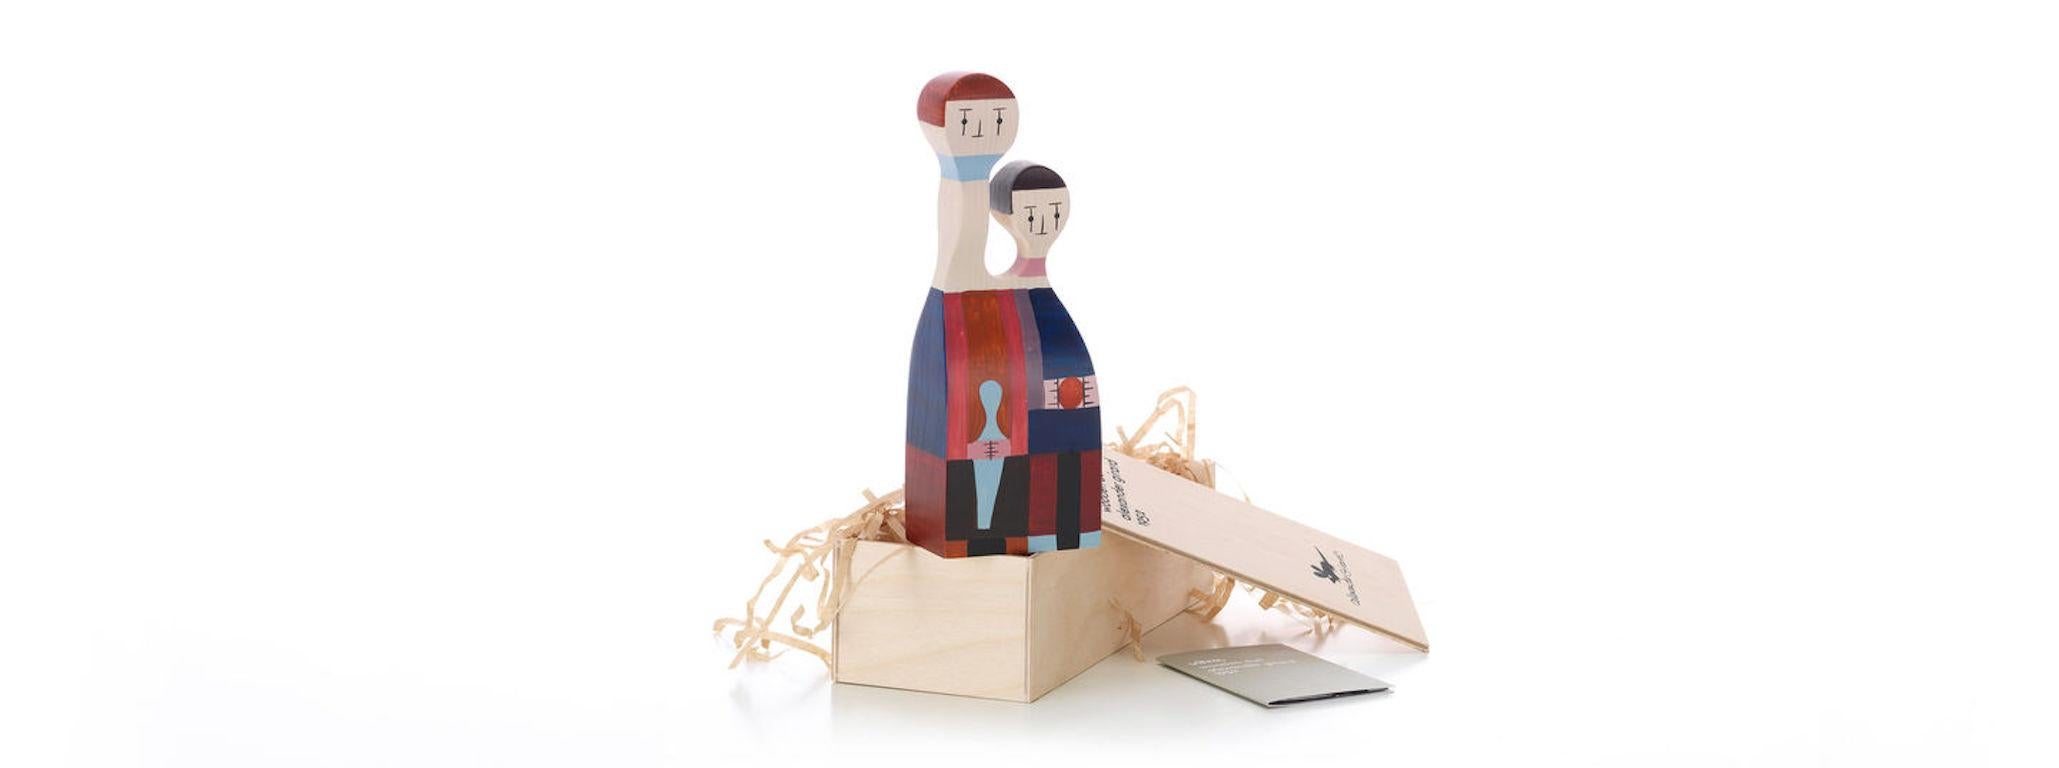 Modern Vitra Wooden Doll No. 11 by Alexander Girard For Sale